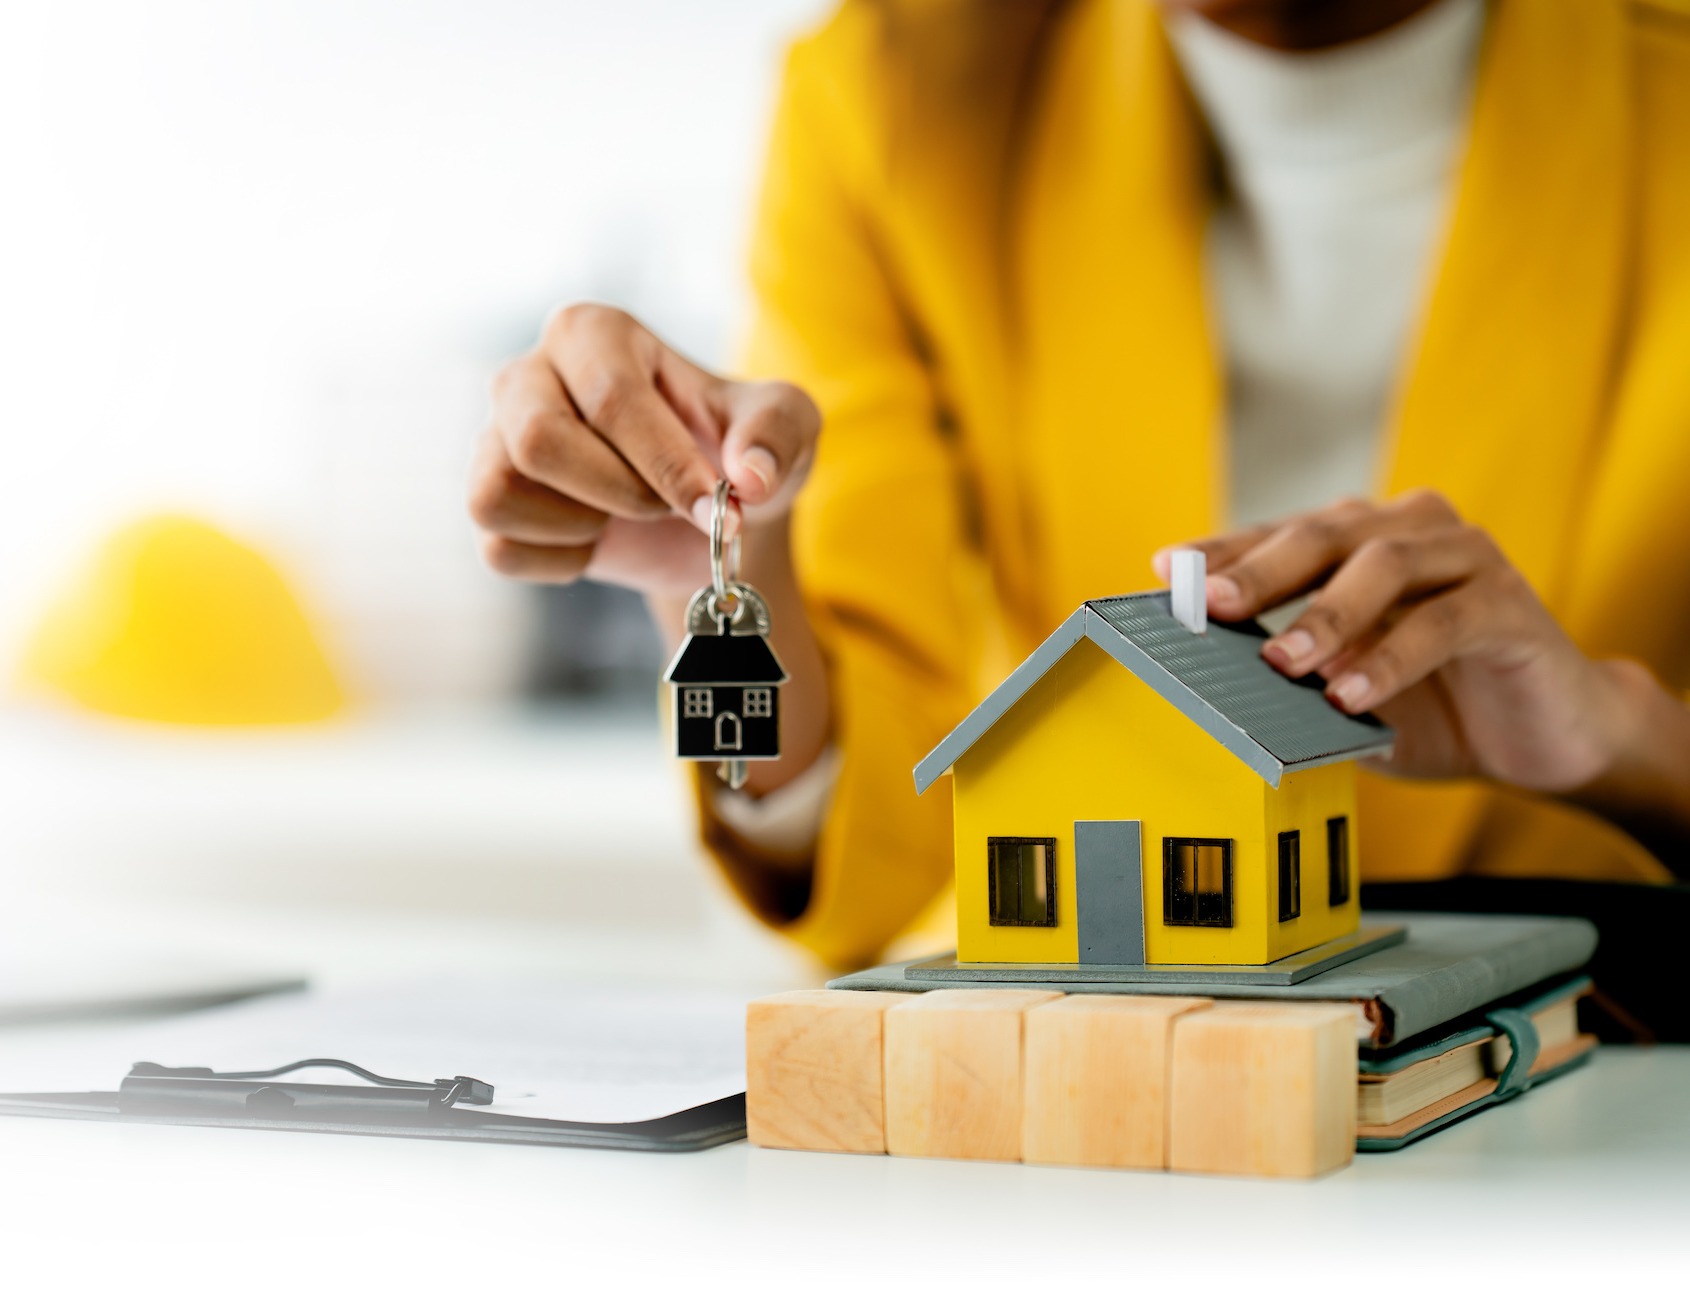 Woman holding keys next to a small model house